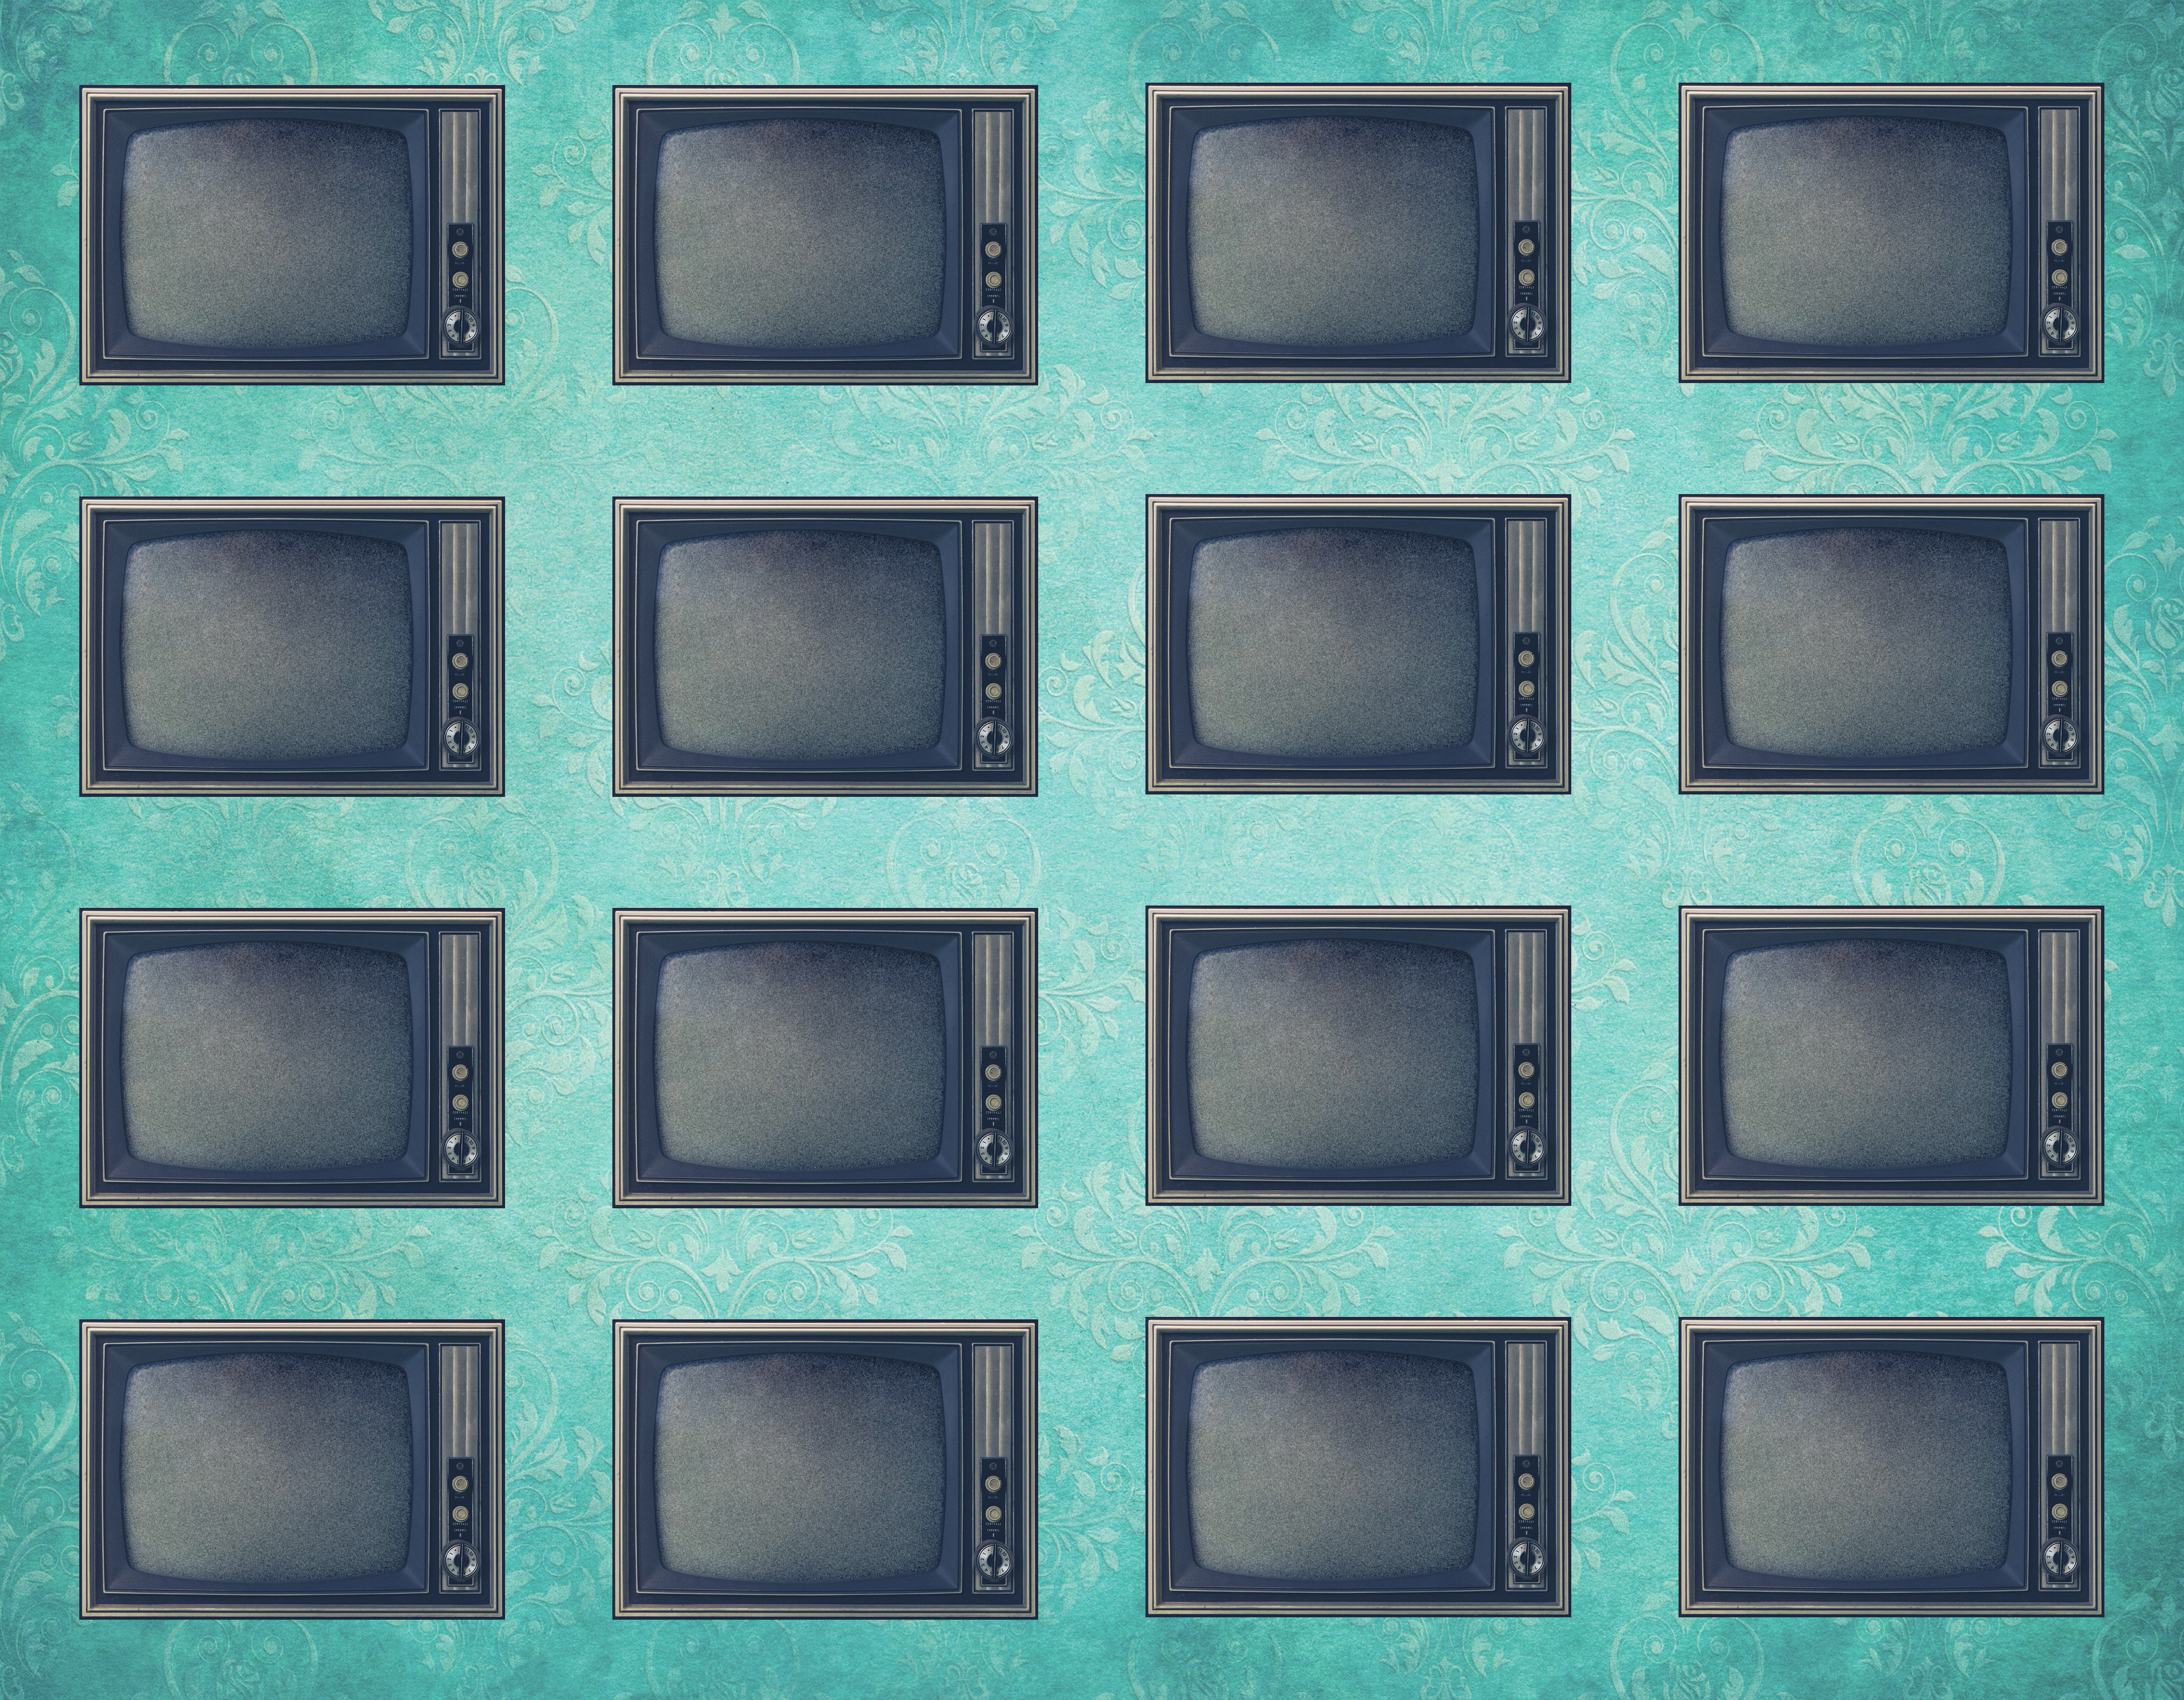 A grid of 16 old analog television sets against a turquoise background.